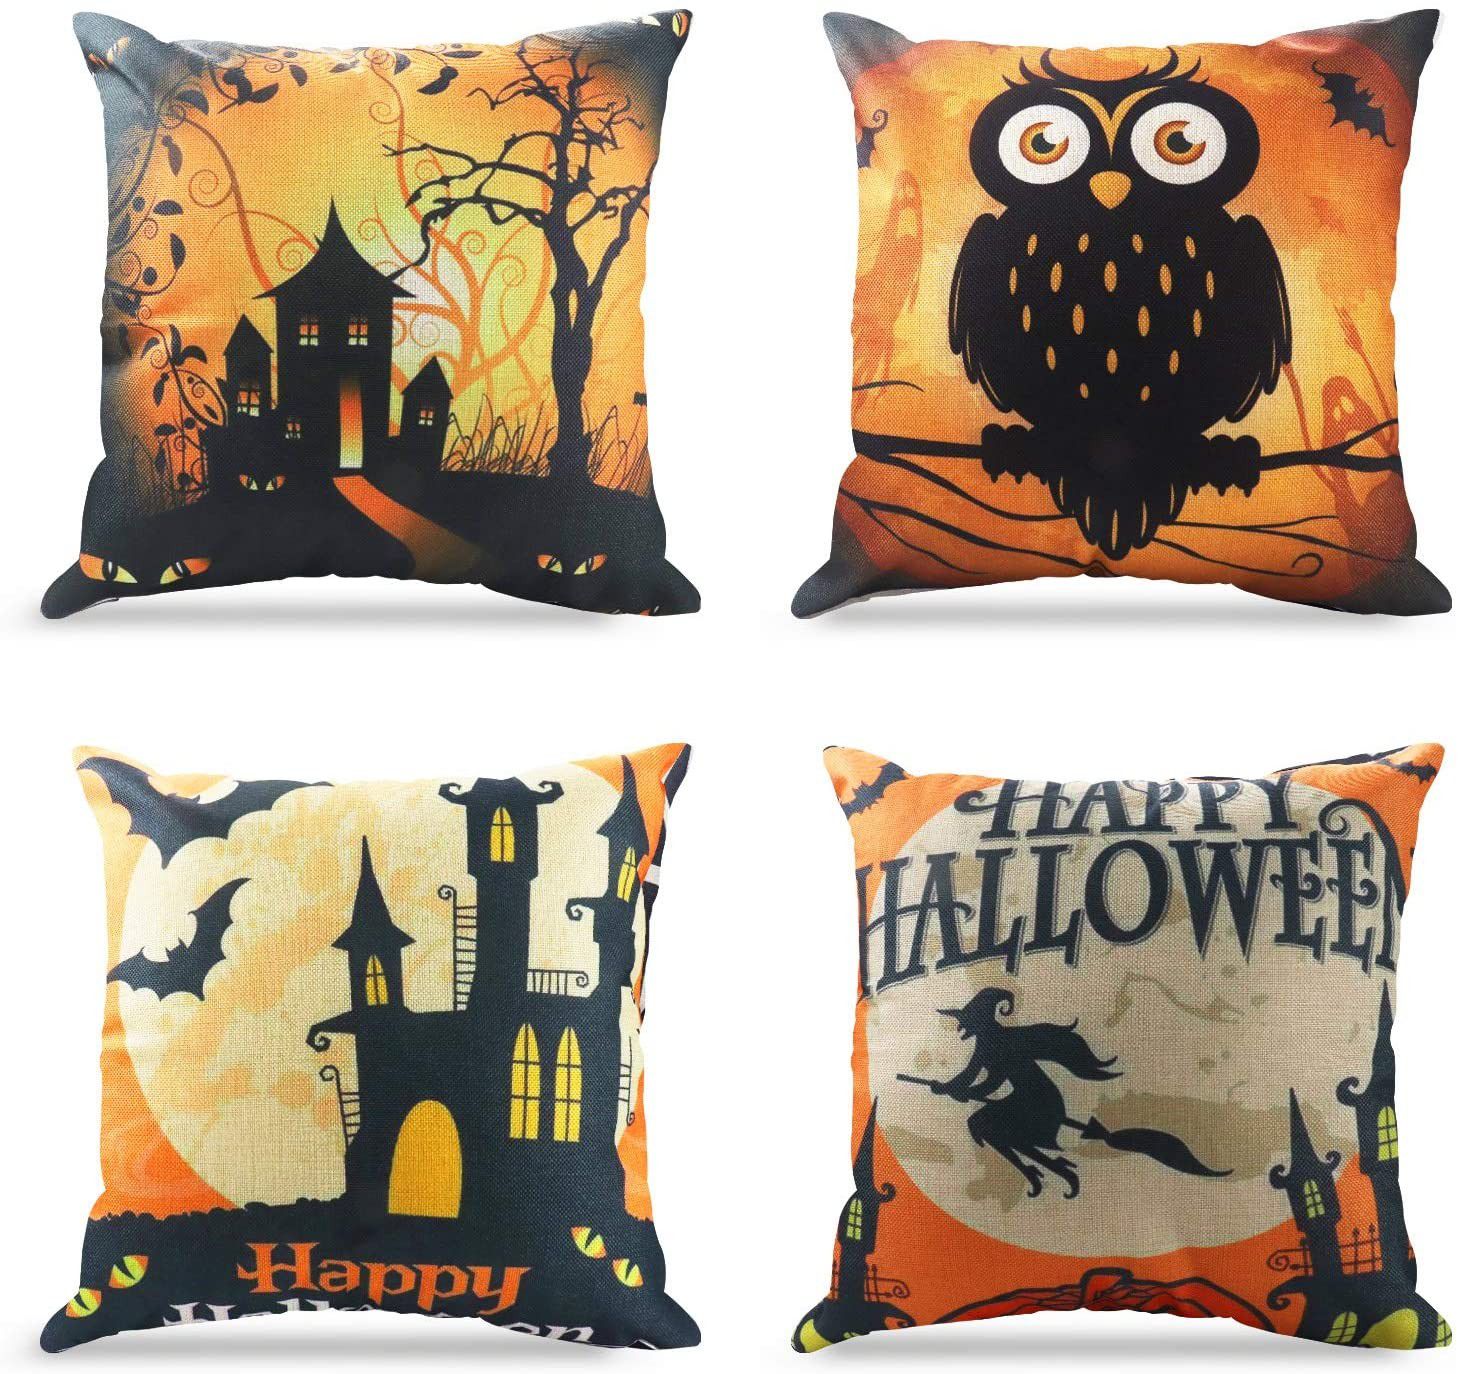 Brand New Halloween Throw Pillow Covers 18 x 18 Inch Owl/Bat/Witch/Castle Theme Sofa Home Decorative Cushion Pillow Case Bedroom Living Dining Seat